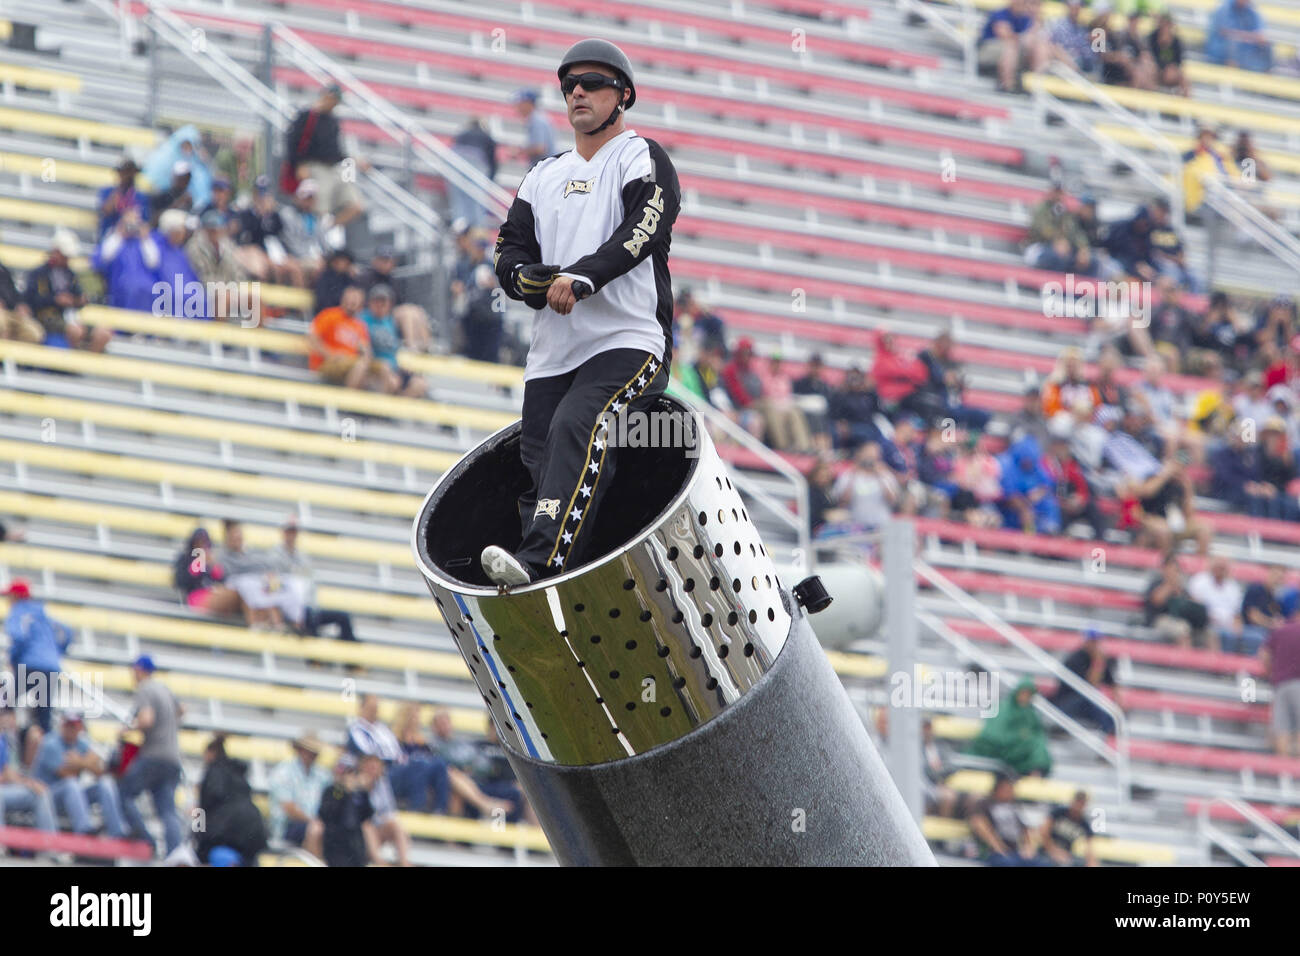 Brooklyn, Michigan, USA. 10th June, 2018. DAVID SMITH JR. prepares to be shot out of a canon at Michigan International Speedway. Credit: Scott Mapes/ZUMA Wire/Alamy Live News Stock Photo